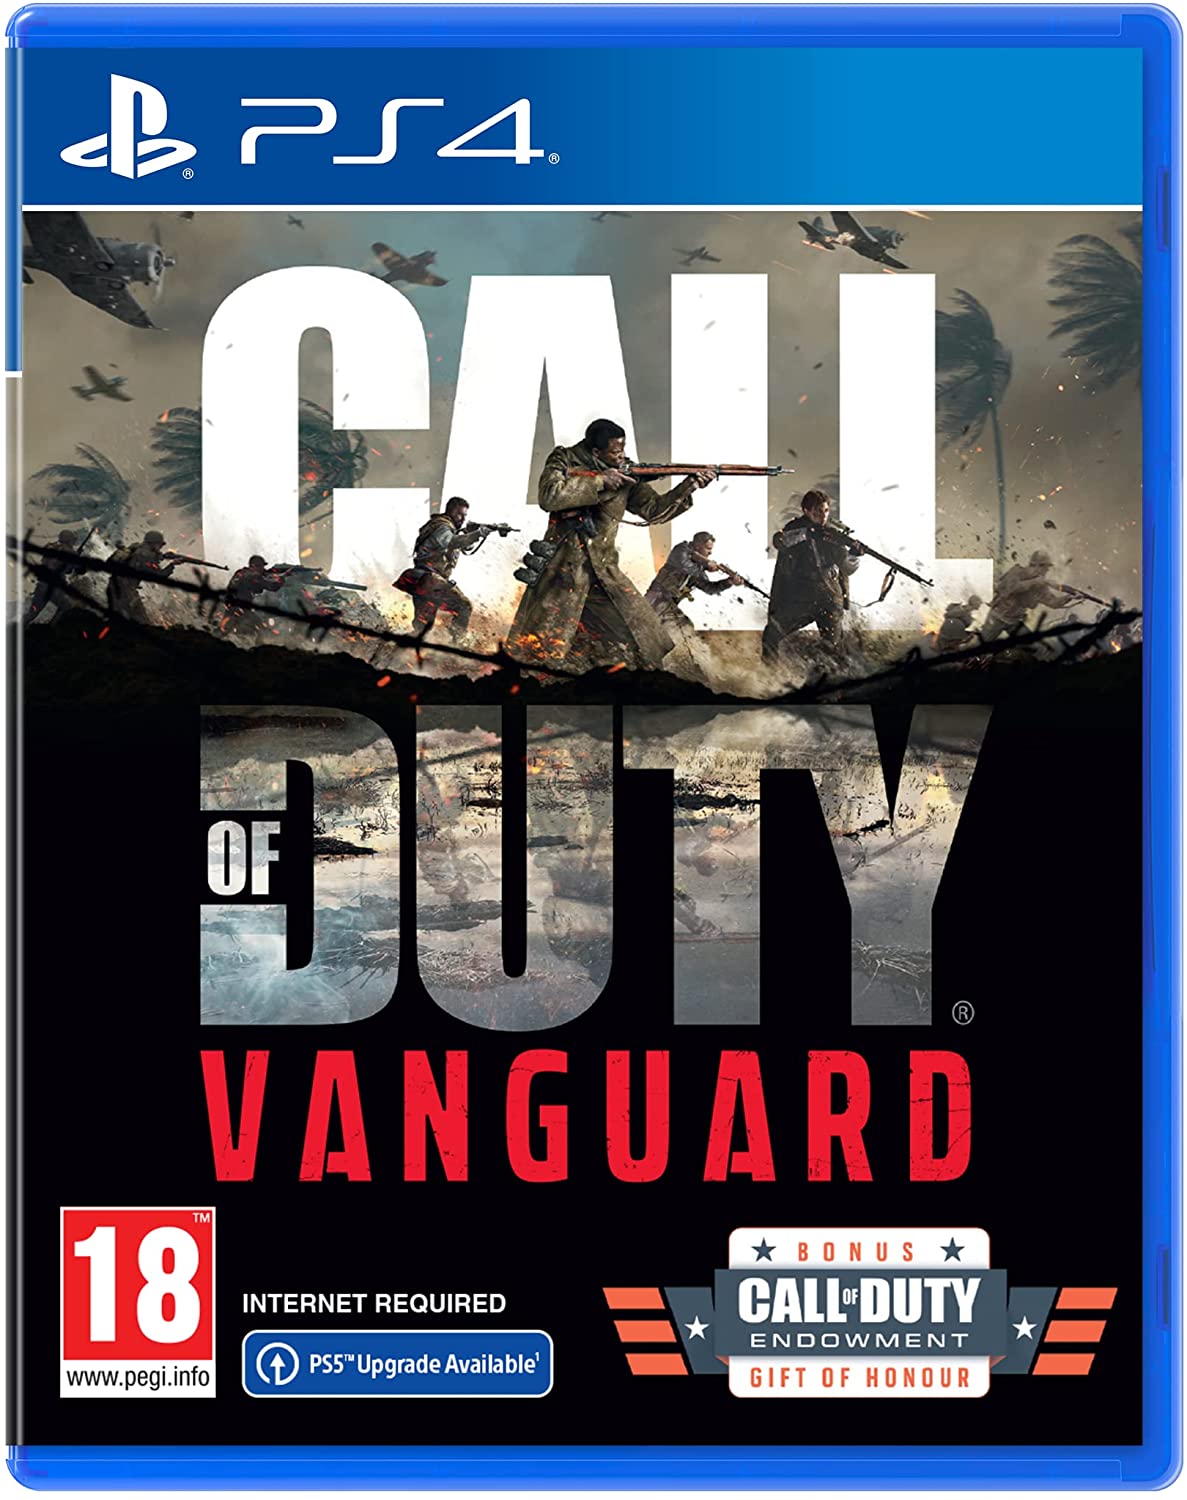 Call of Duty Vanguard - PS4 Game